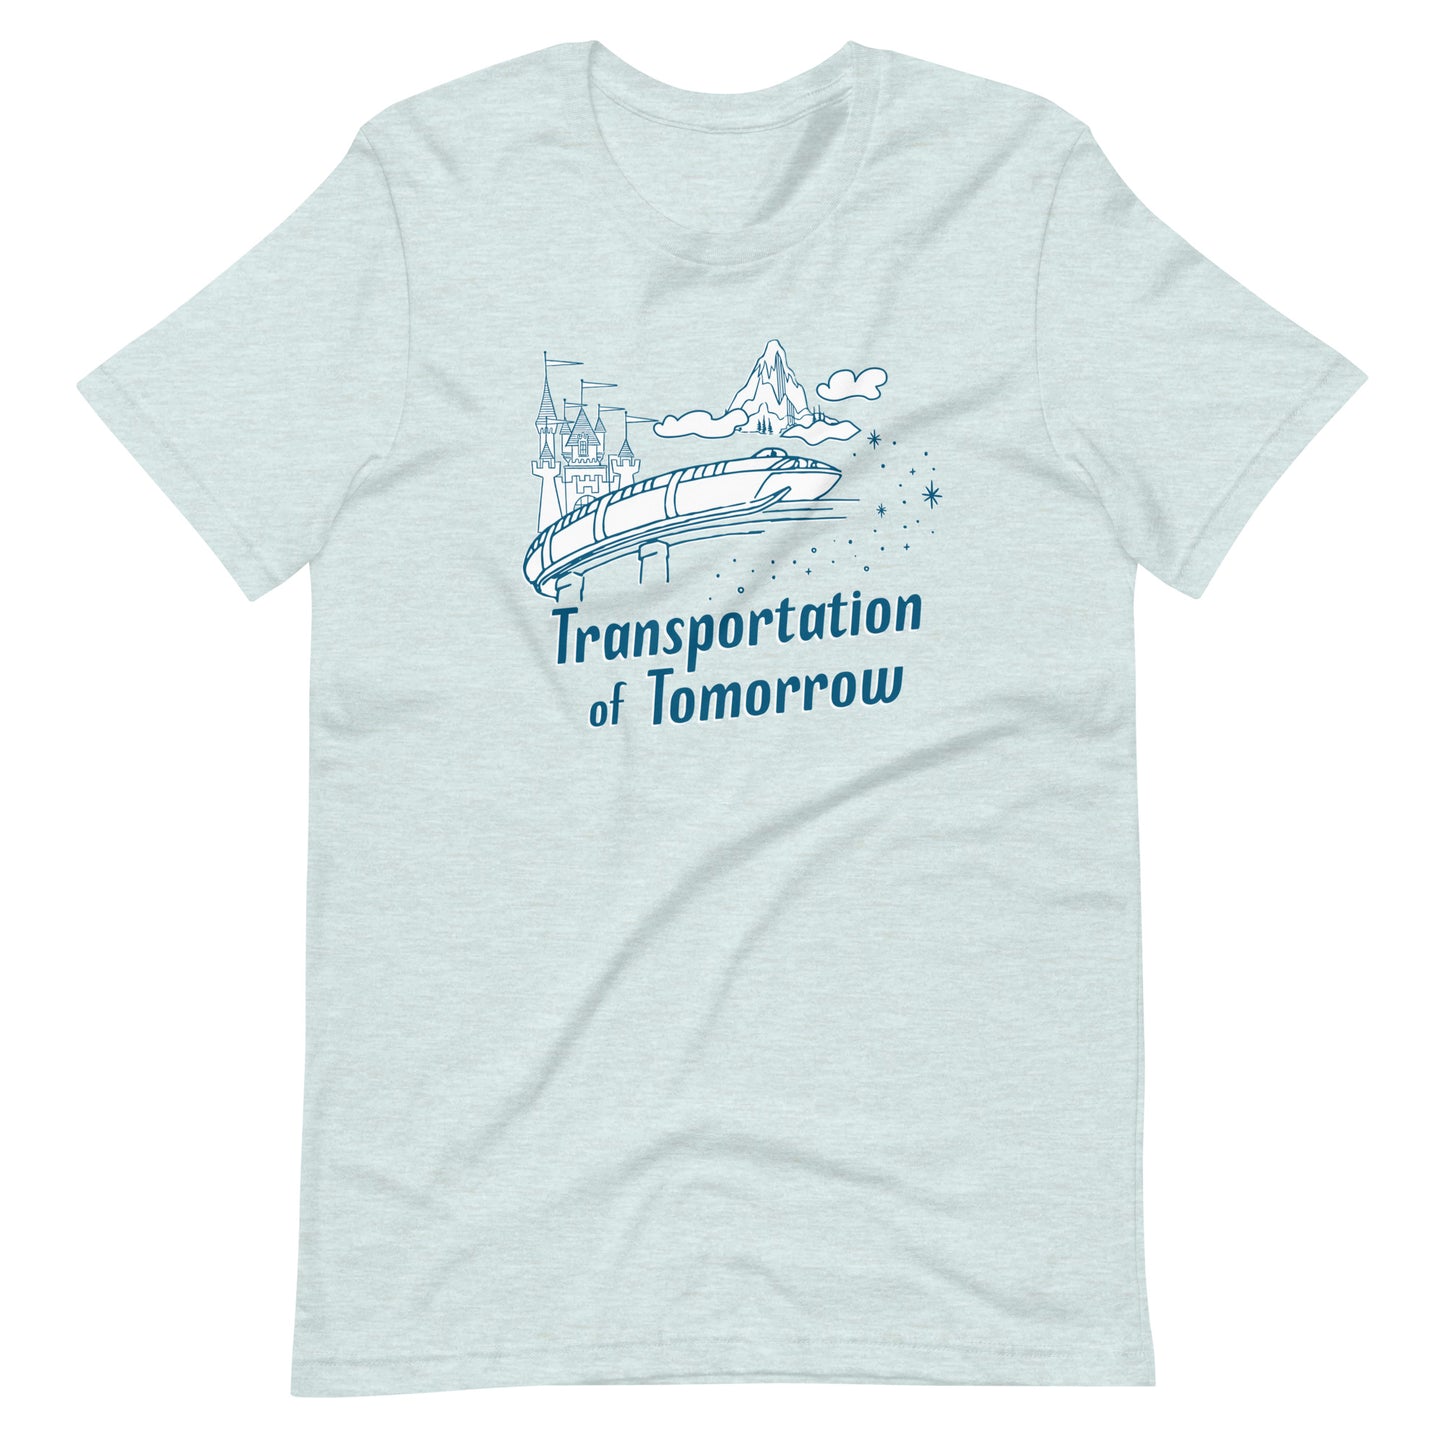 Light blue shirt printed with vintage style sketch of the Matterhorn, Castle, and Monorail with pixie dust. The shirt says Transportation of Tomorrow.